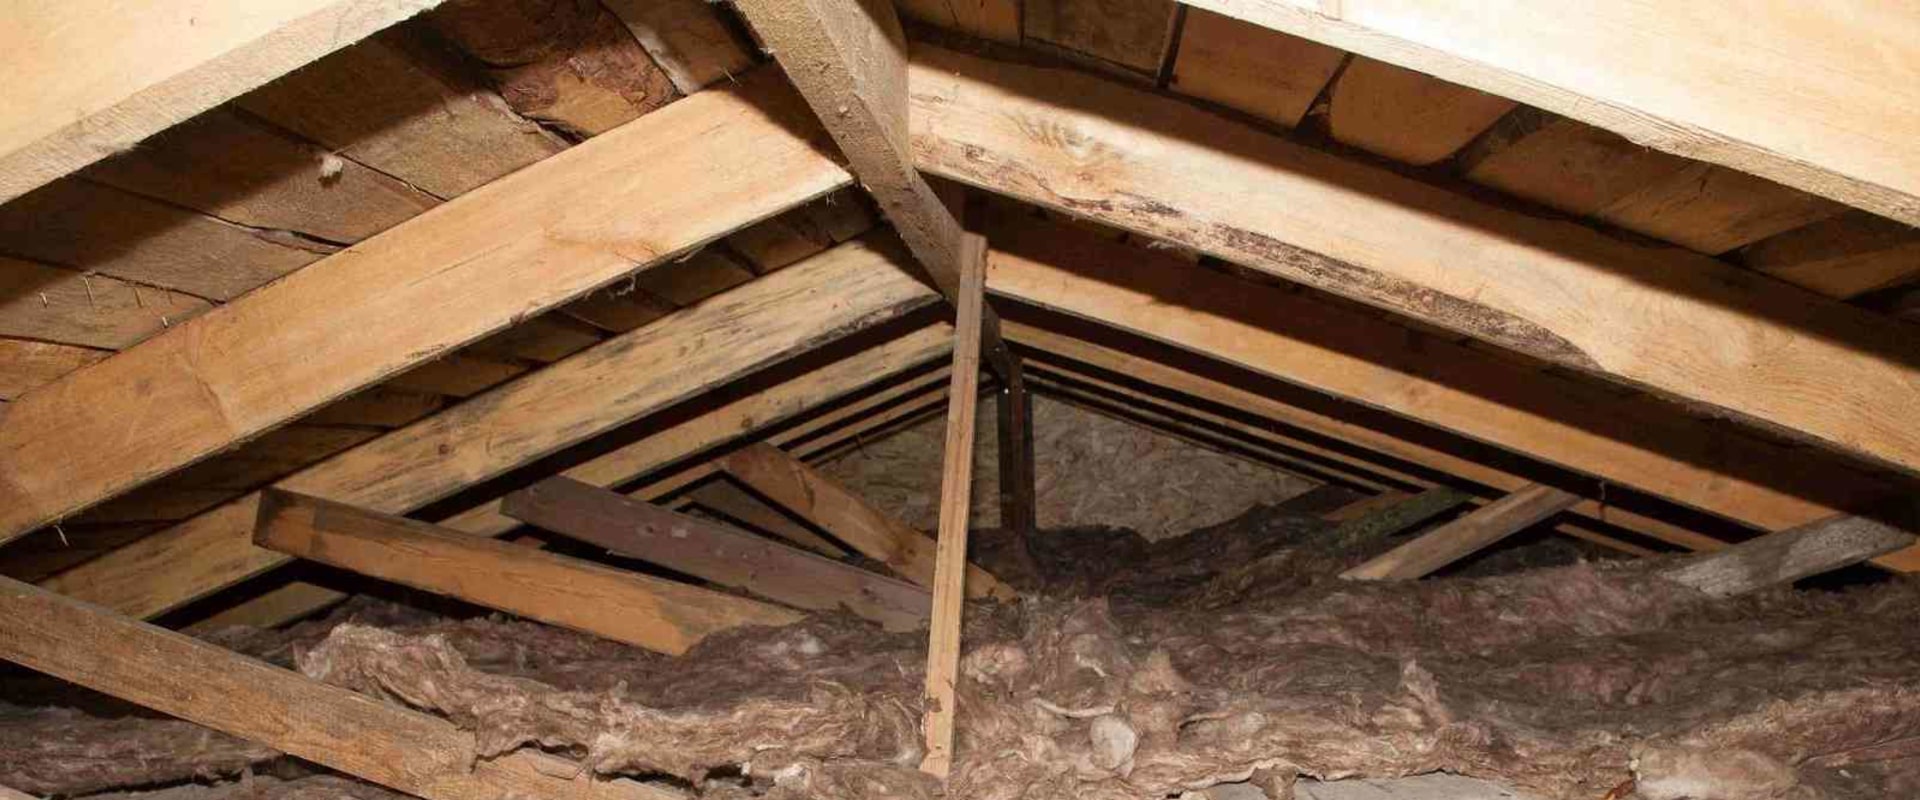 Insulating Your Attic: A Step-by-Step Guide